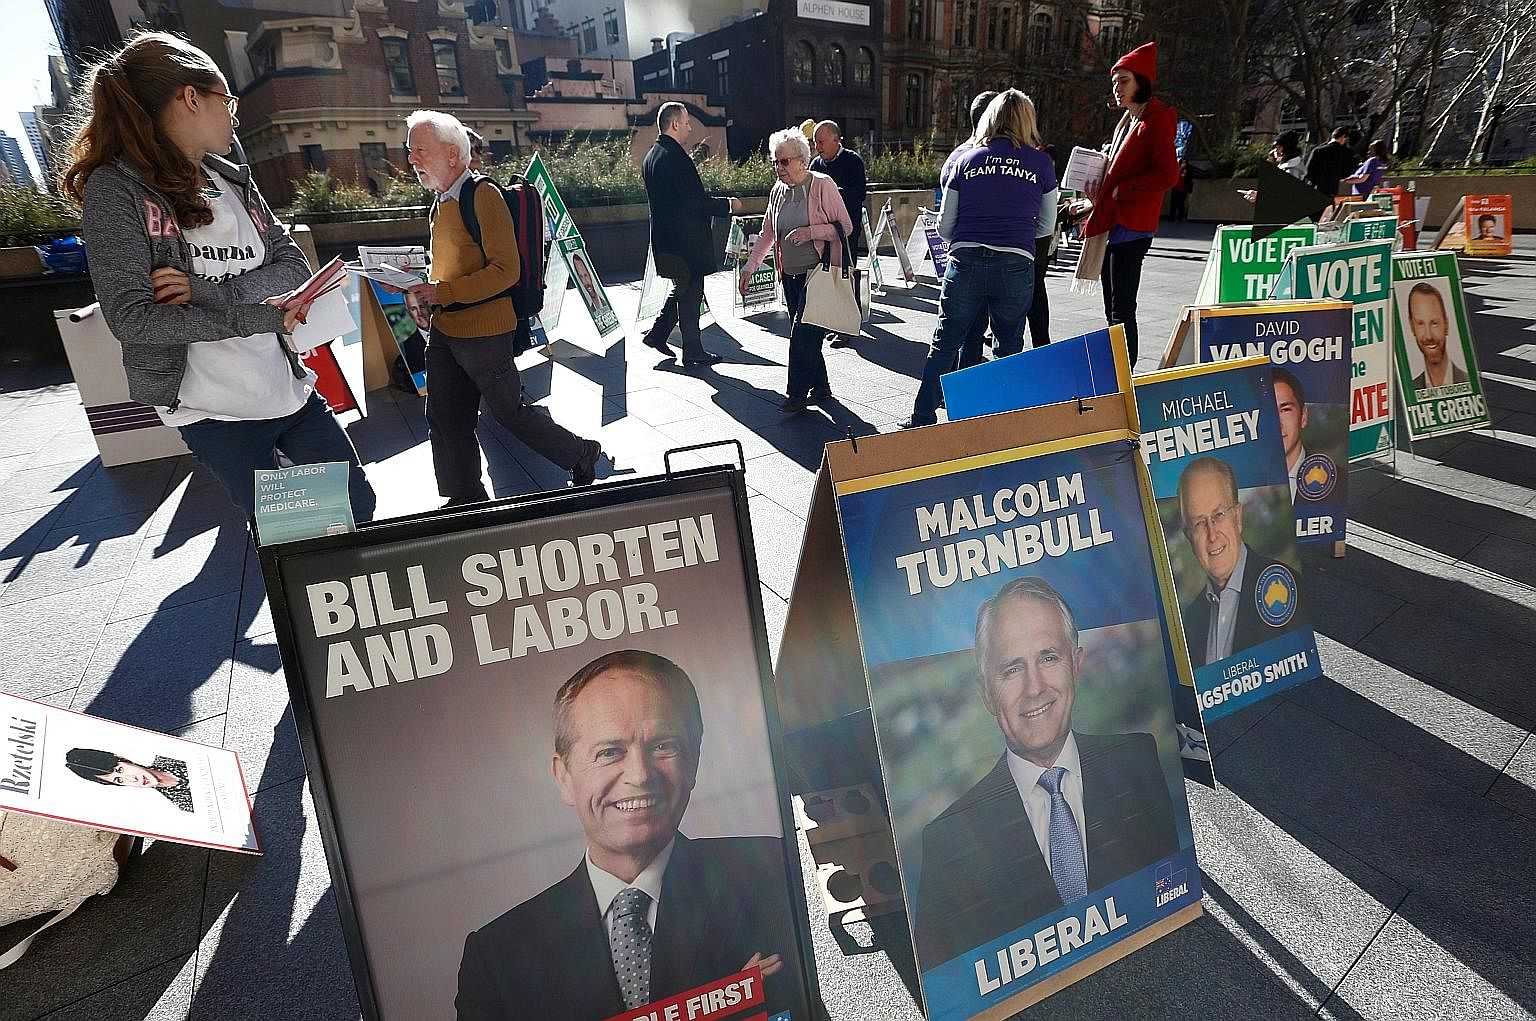 Candidates like Mr Shorten (above, left, featured in a promotional poster near a Sydney polling centre) and Mr Turnbull have mostly kept their campaigns free of the vitriol seen in other recent political contests.